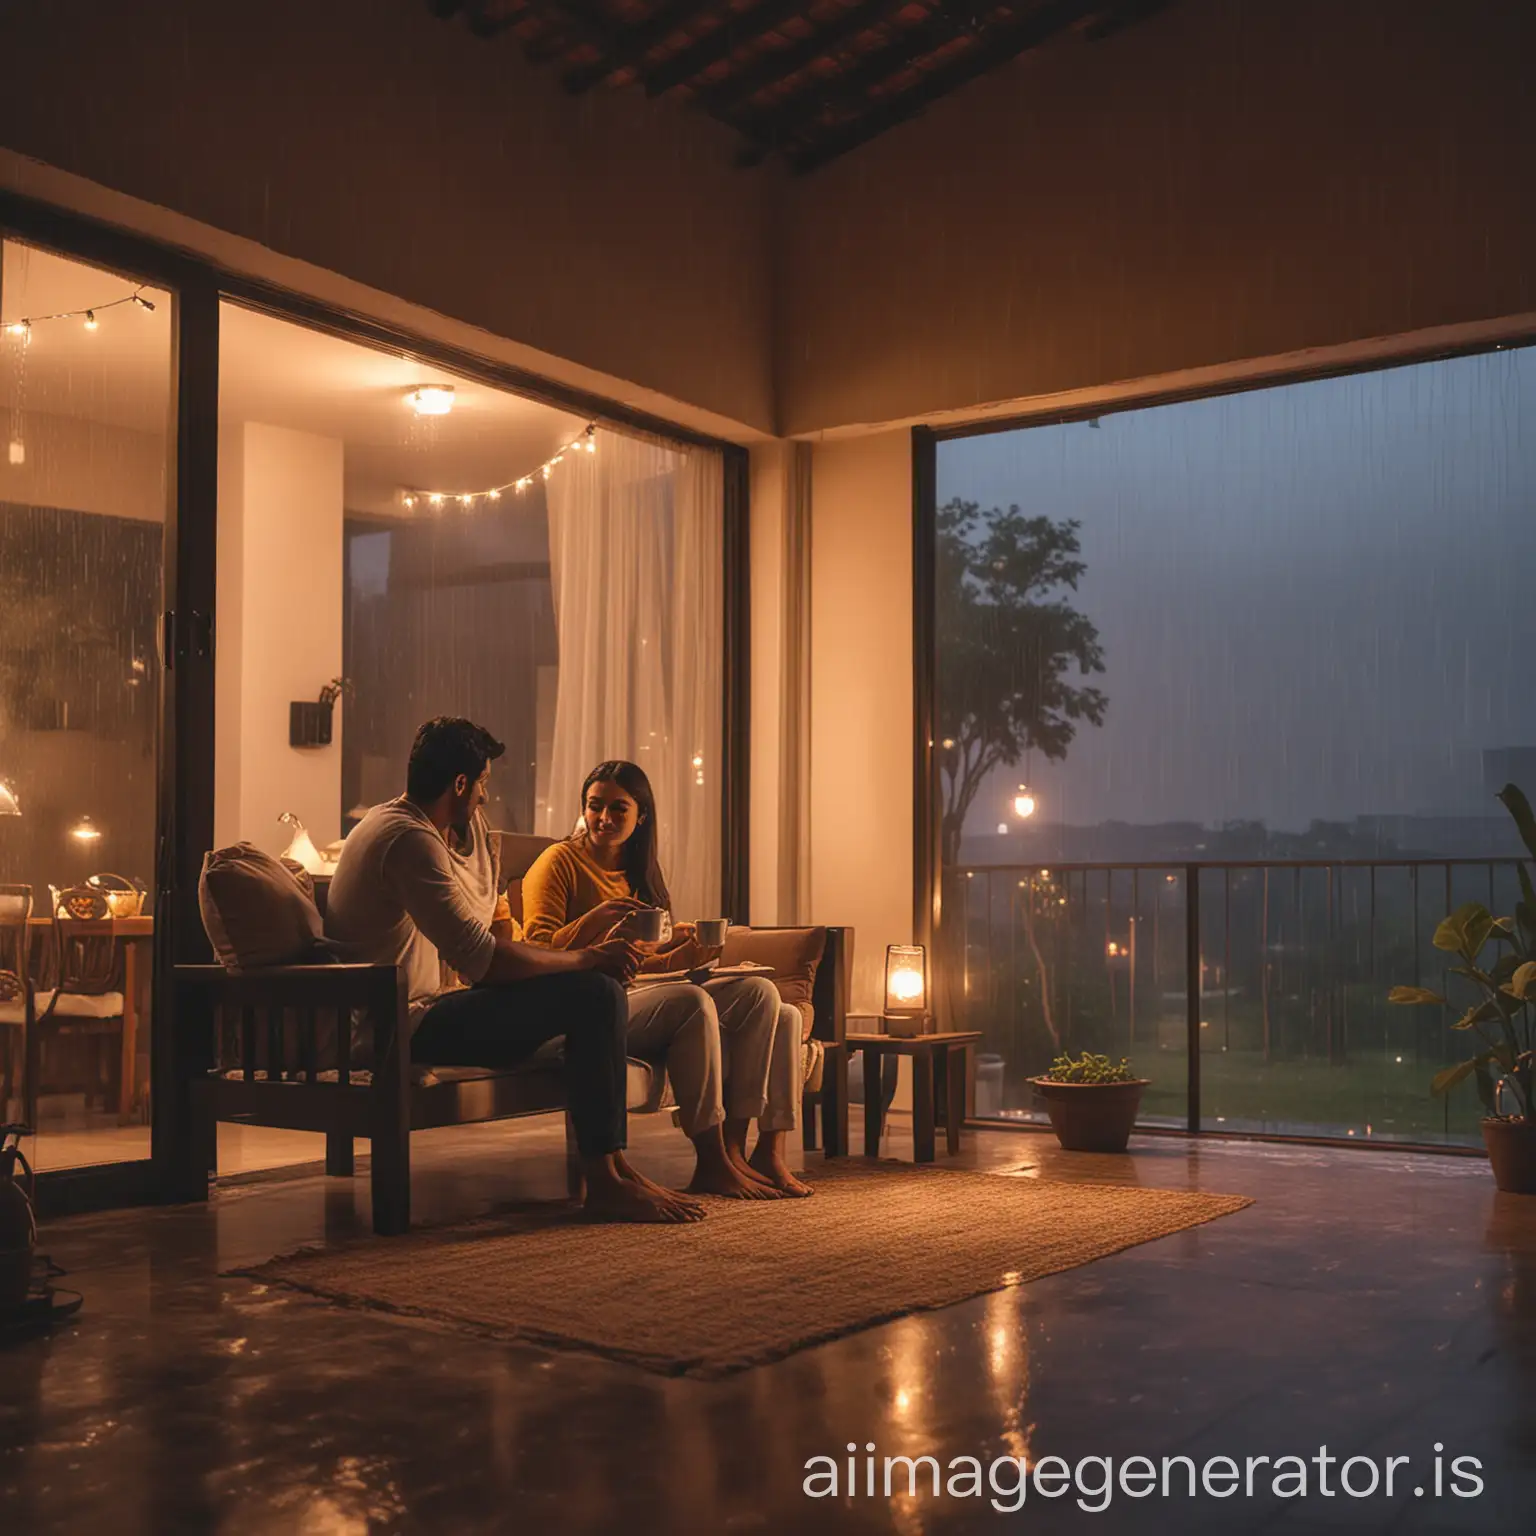 indian guy sitting in his living room with his wife of his villa with hot tea. seeing outside raining in dark cloudy weather. room is with warm lights with romantic vibe